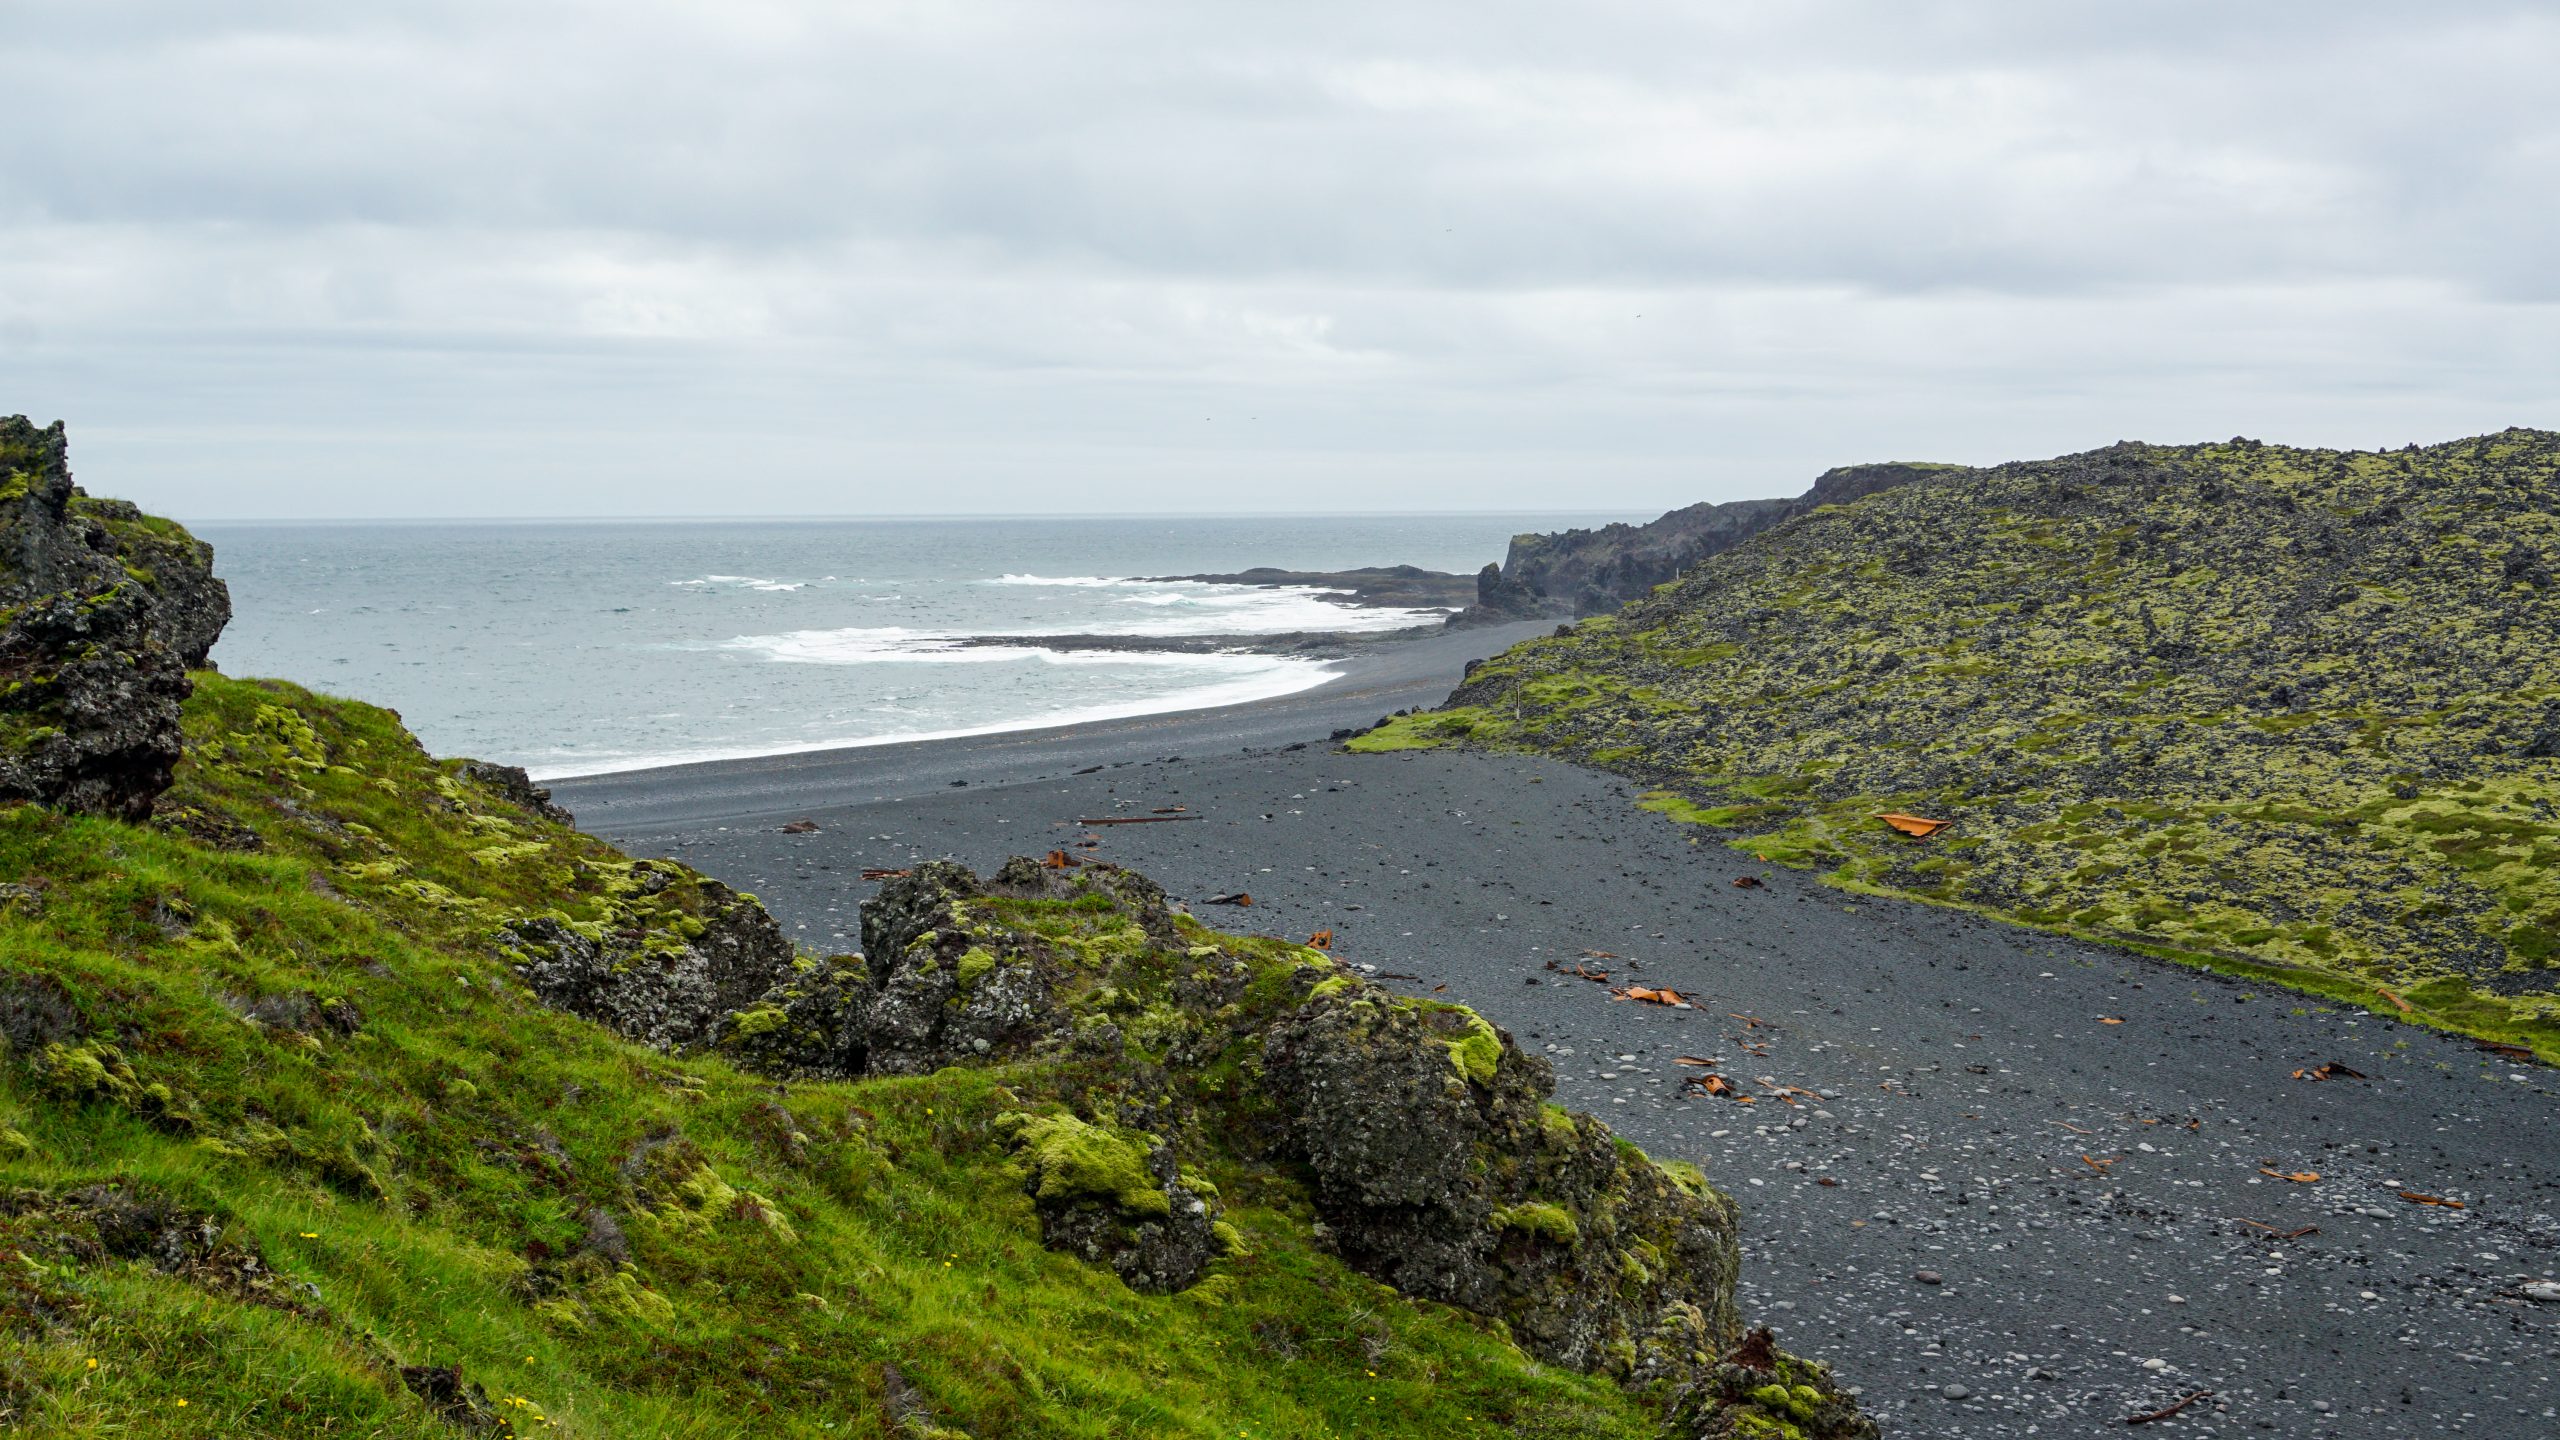 Djúpalónssandur, one of the black sand beaches included in the Iceland road trip itinerary